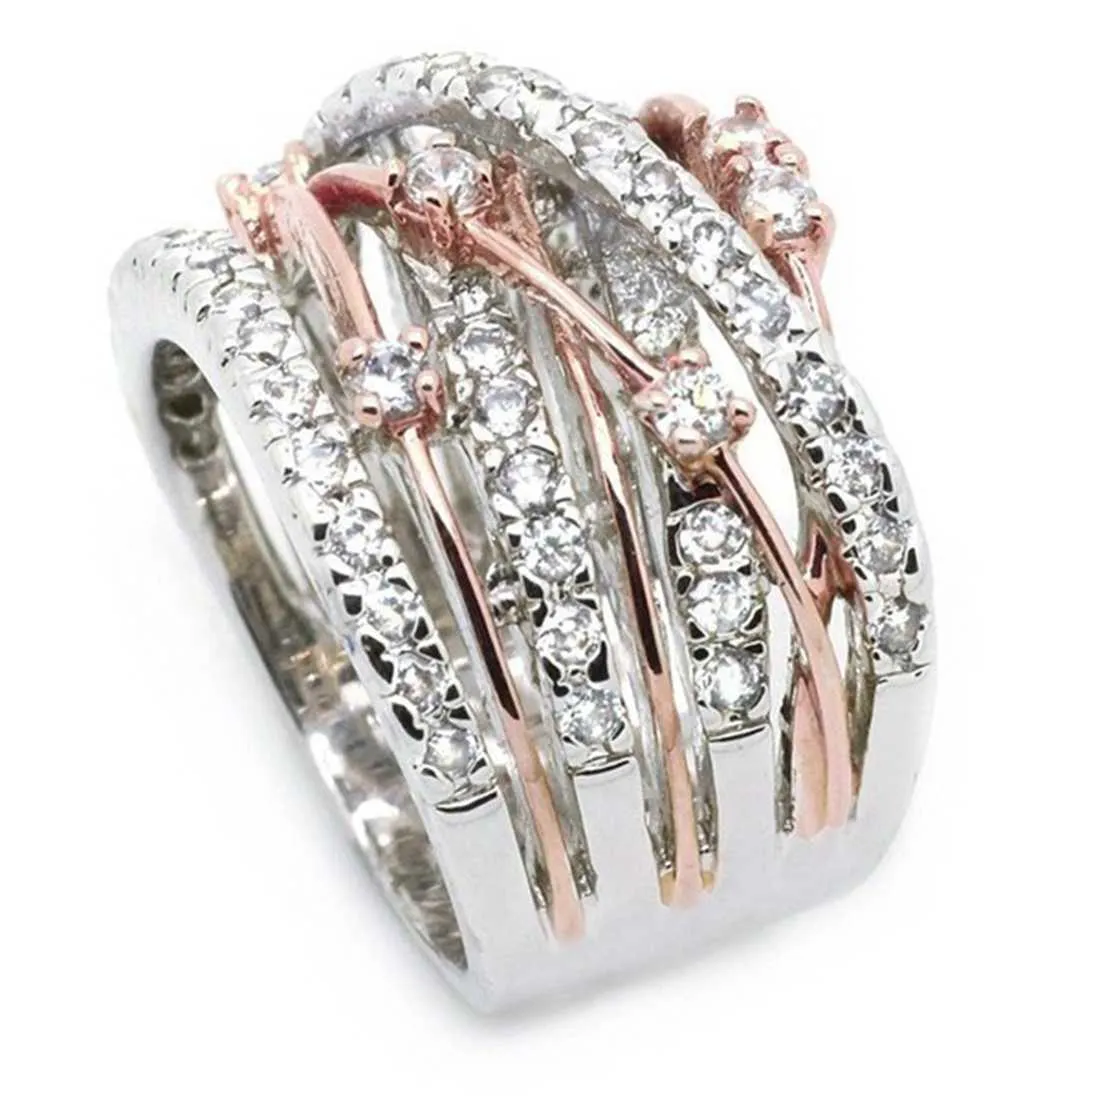 Silver Color Rose Gold Band Rings for Women Wedding Engagement Fashion Jewelry 2019 New X07155784335